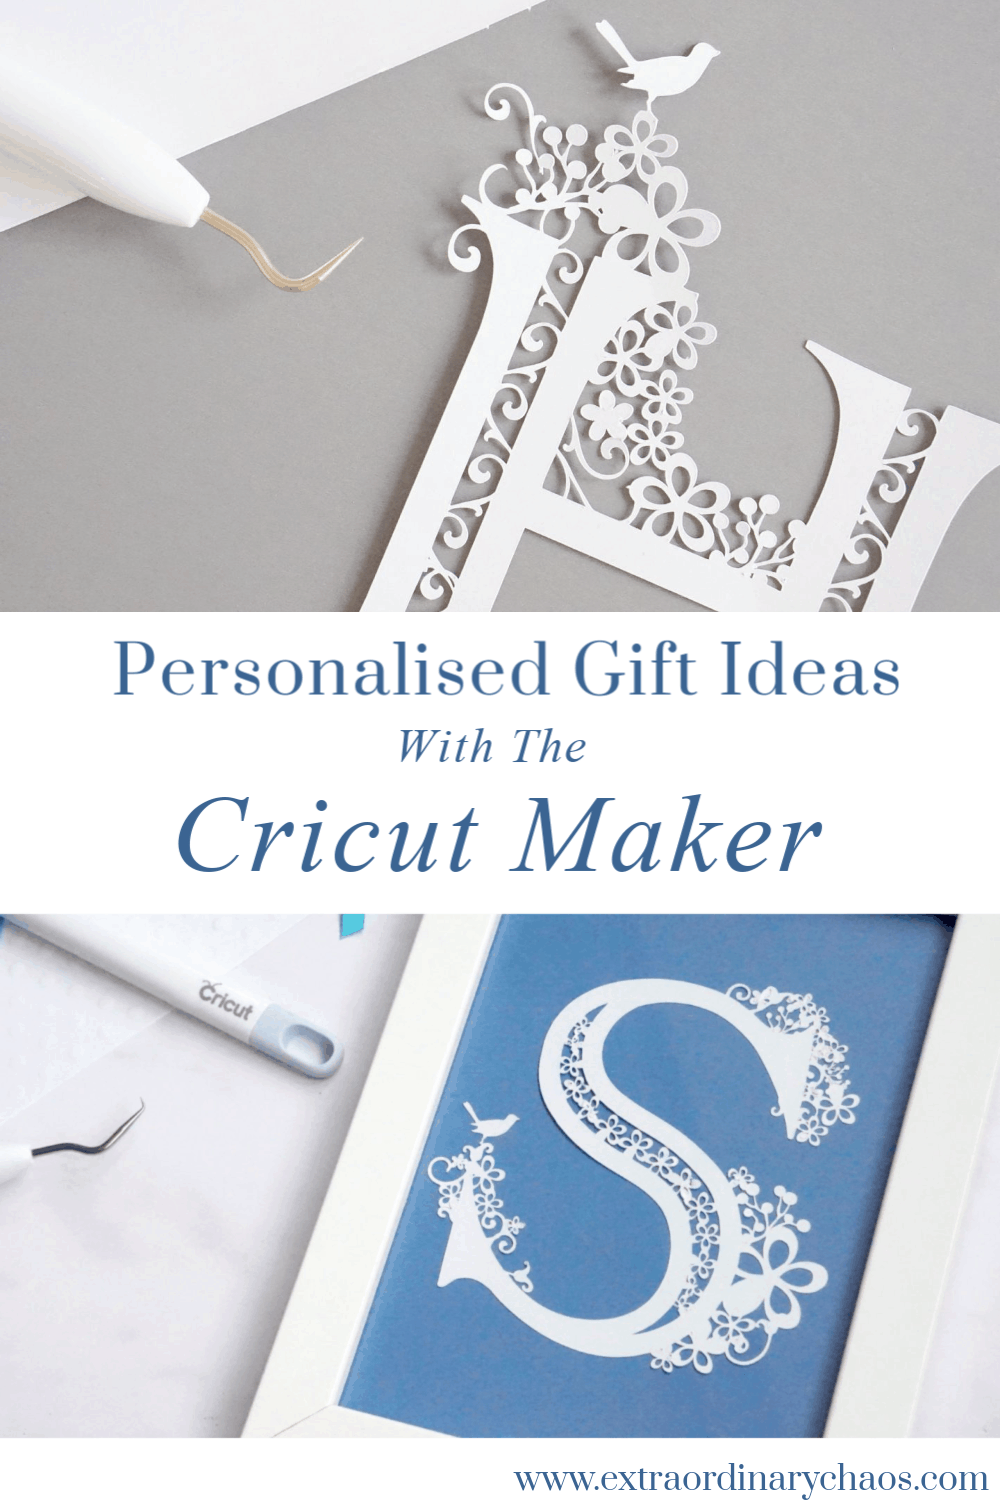 Personalised Gift Ideas for Weddings, Christenings and Birthdays with the Cricut Maker #personalisedgift #weddinggift #christeninggift #papercuts